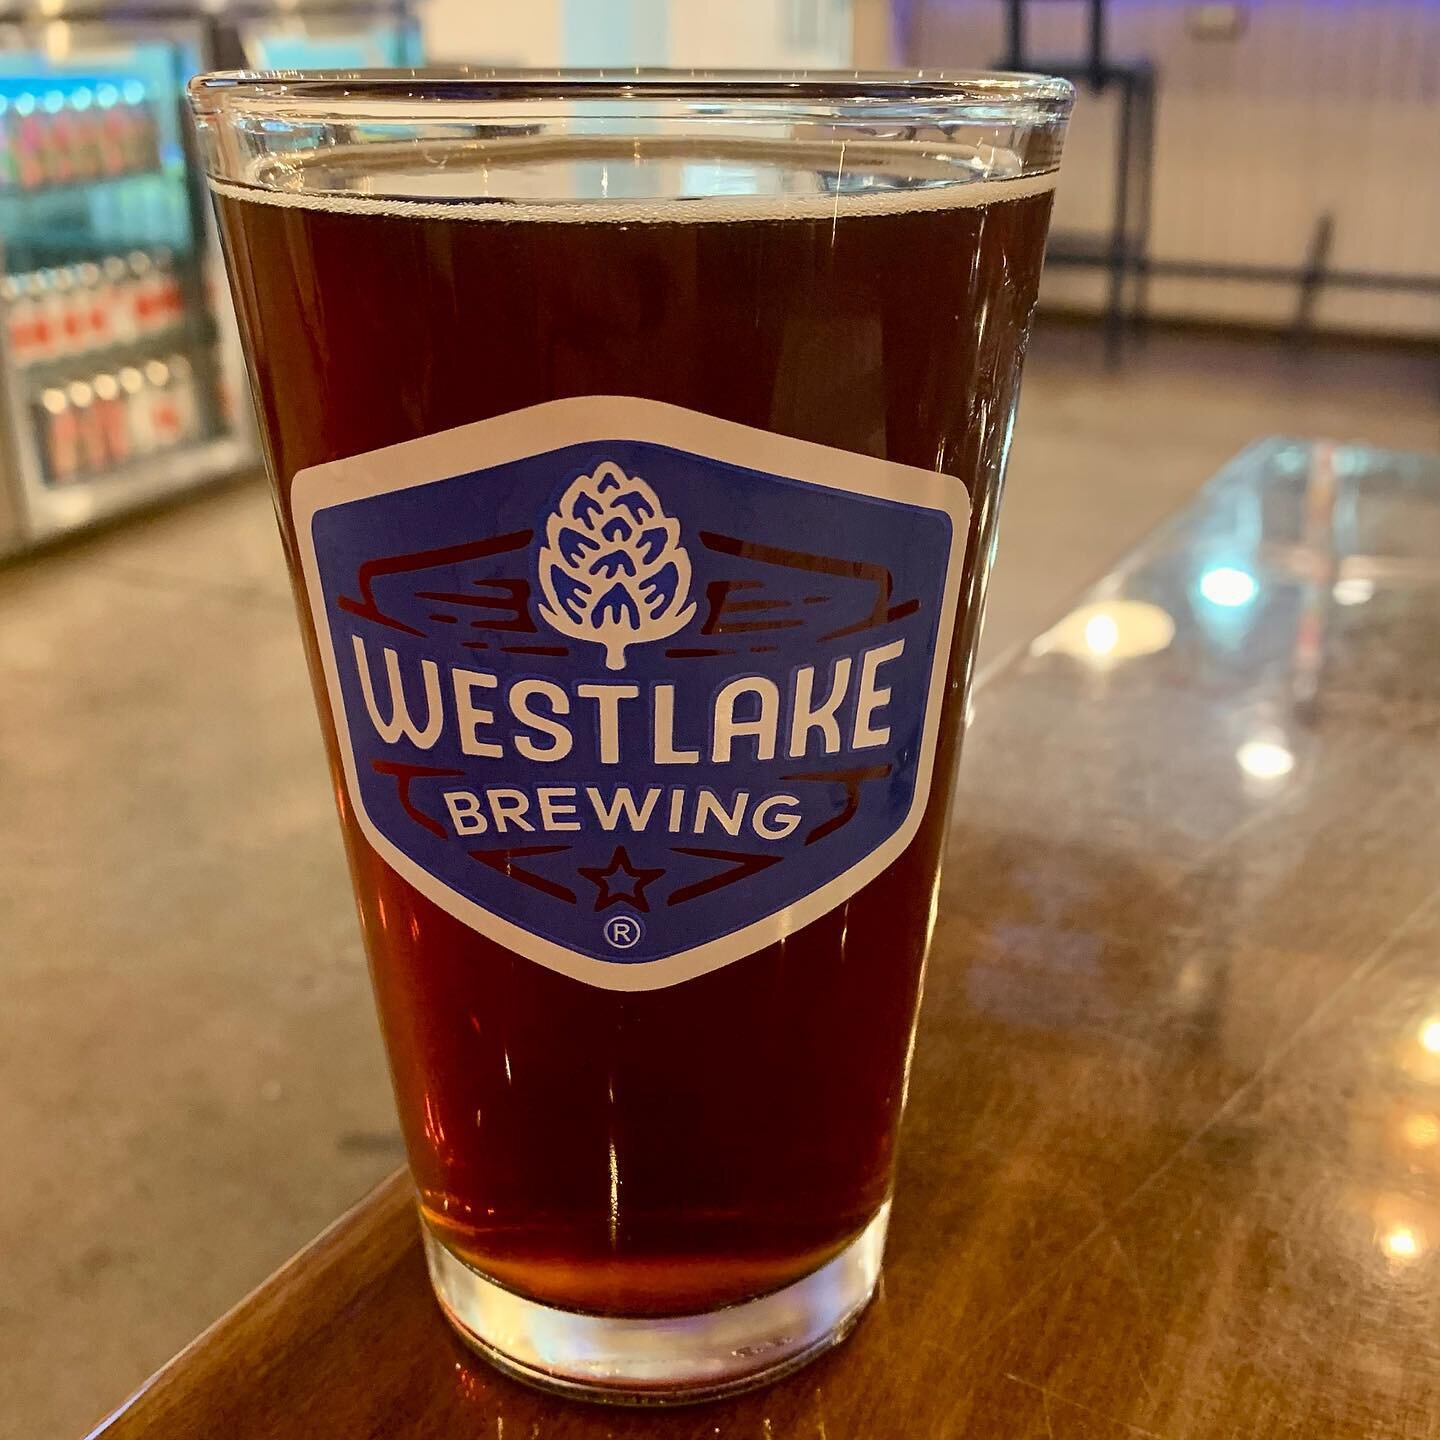 From porters with toffee notes and sours with pineapple flavor, @westlakebeer offers plenty of choices no matter what you fancy. Read more about what beers we sampled during our visit to DFW on the blog - link in bio! 🍻